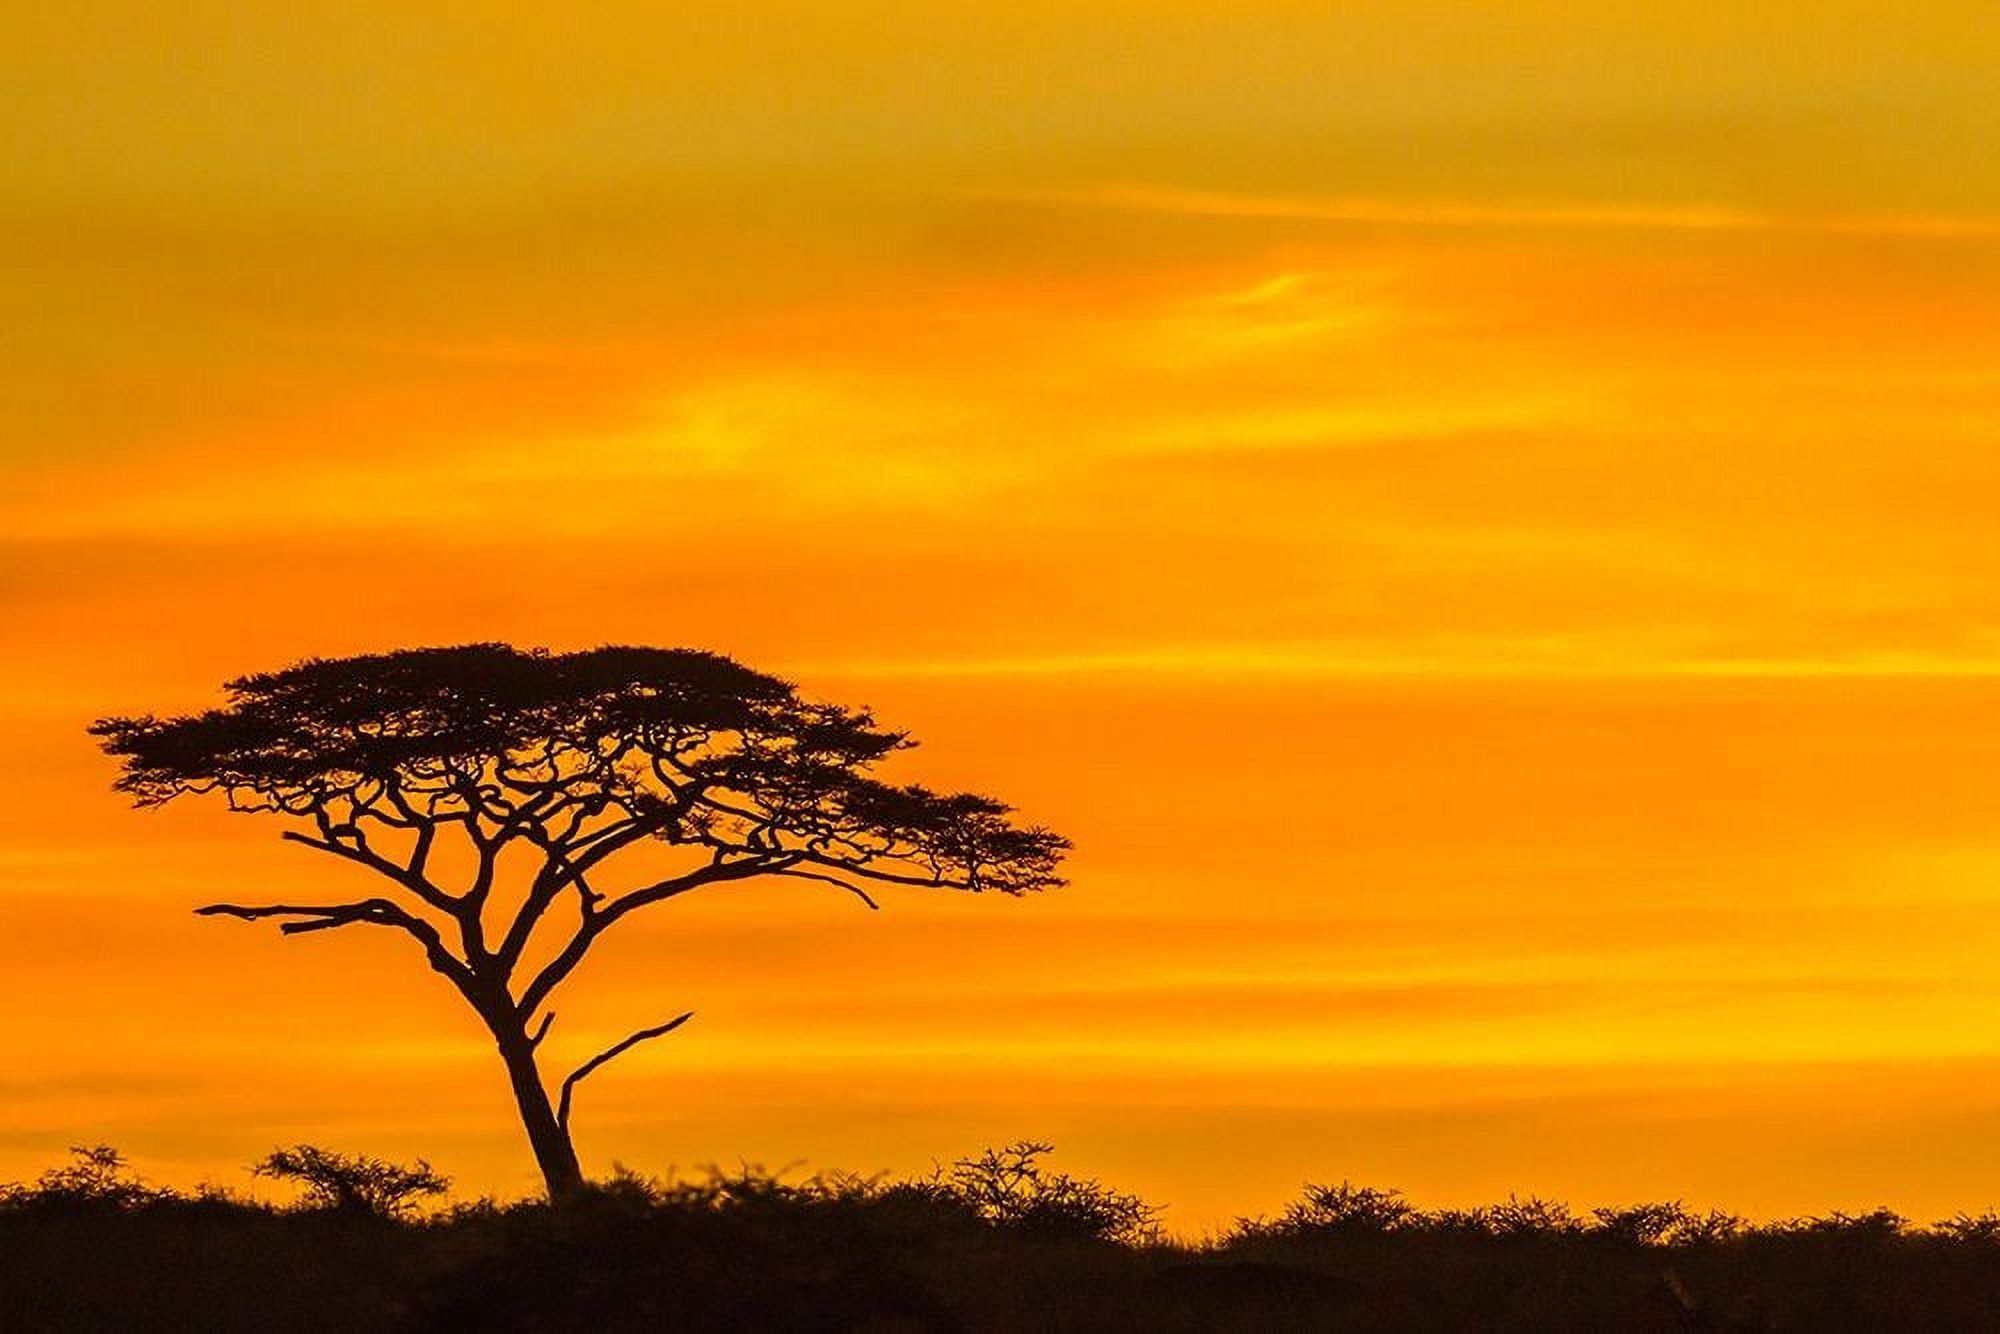 Jaynes Gallery 24x17 Gold Ornate Wood Framed with Double Matting Museum Art Print Titled - Africa-Tanzania-Serengeti National Park Acacia tree silhouette at sunset - image 2 of 4